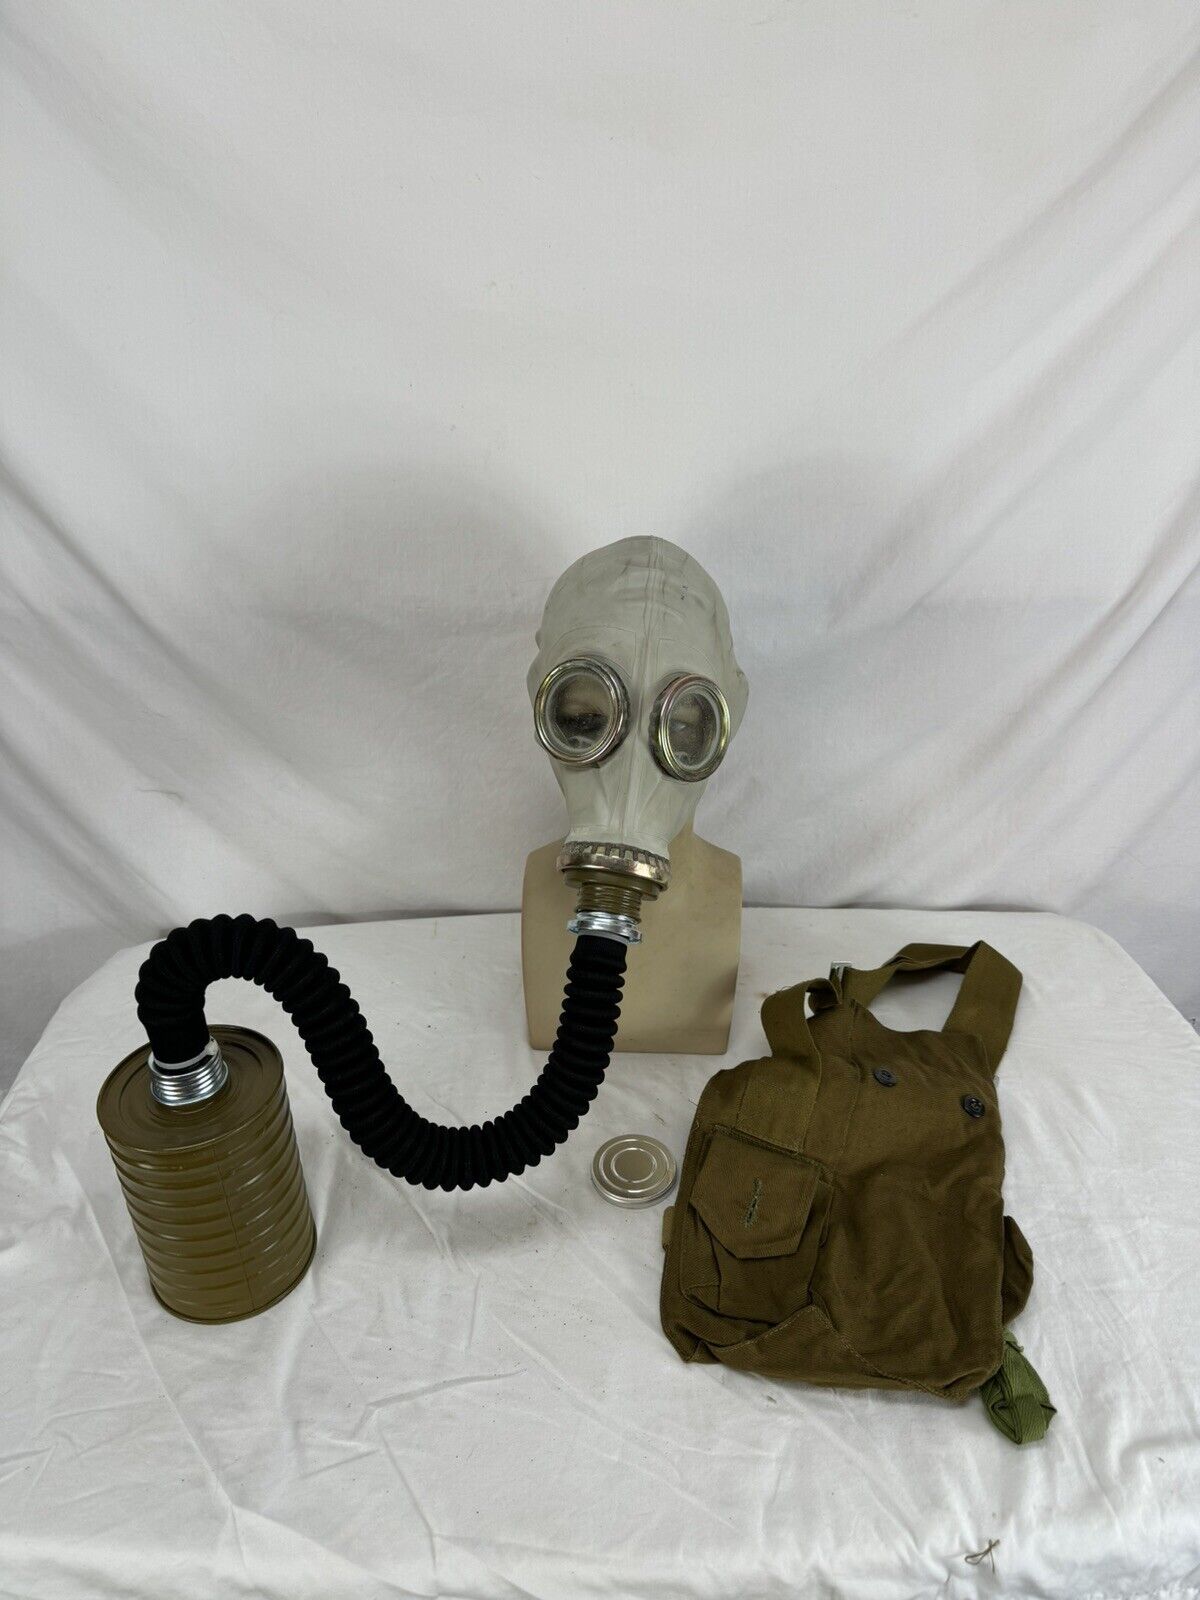 Vintage Russian GP-5 Gas Mask Chernobyl Style With Filter 1971 Date Size 1 Small